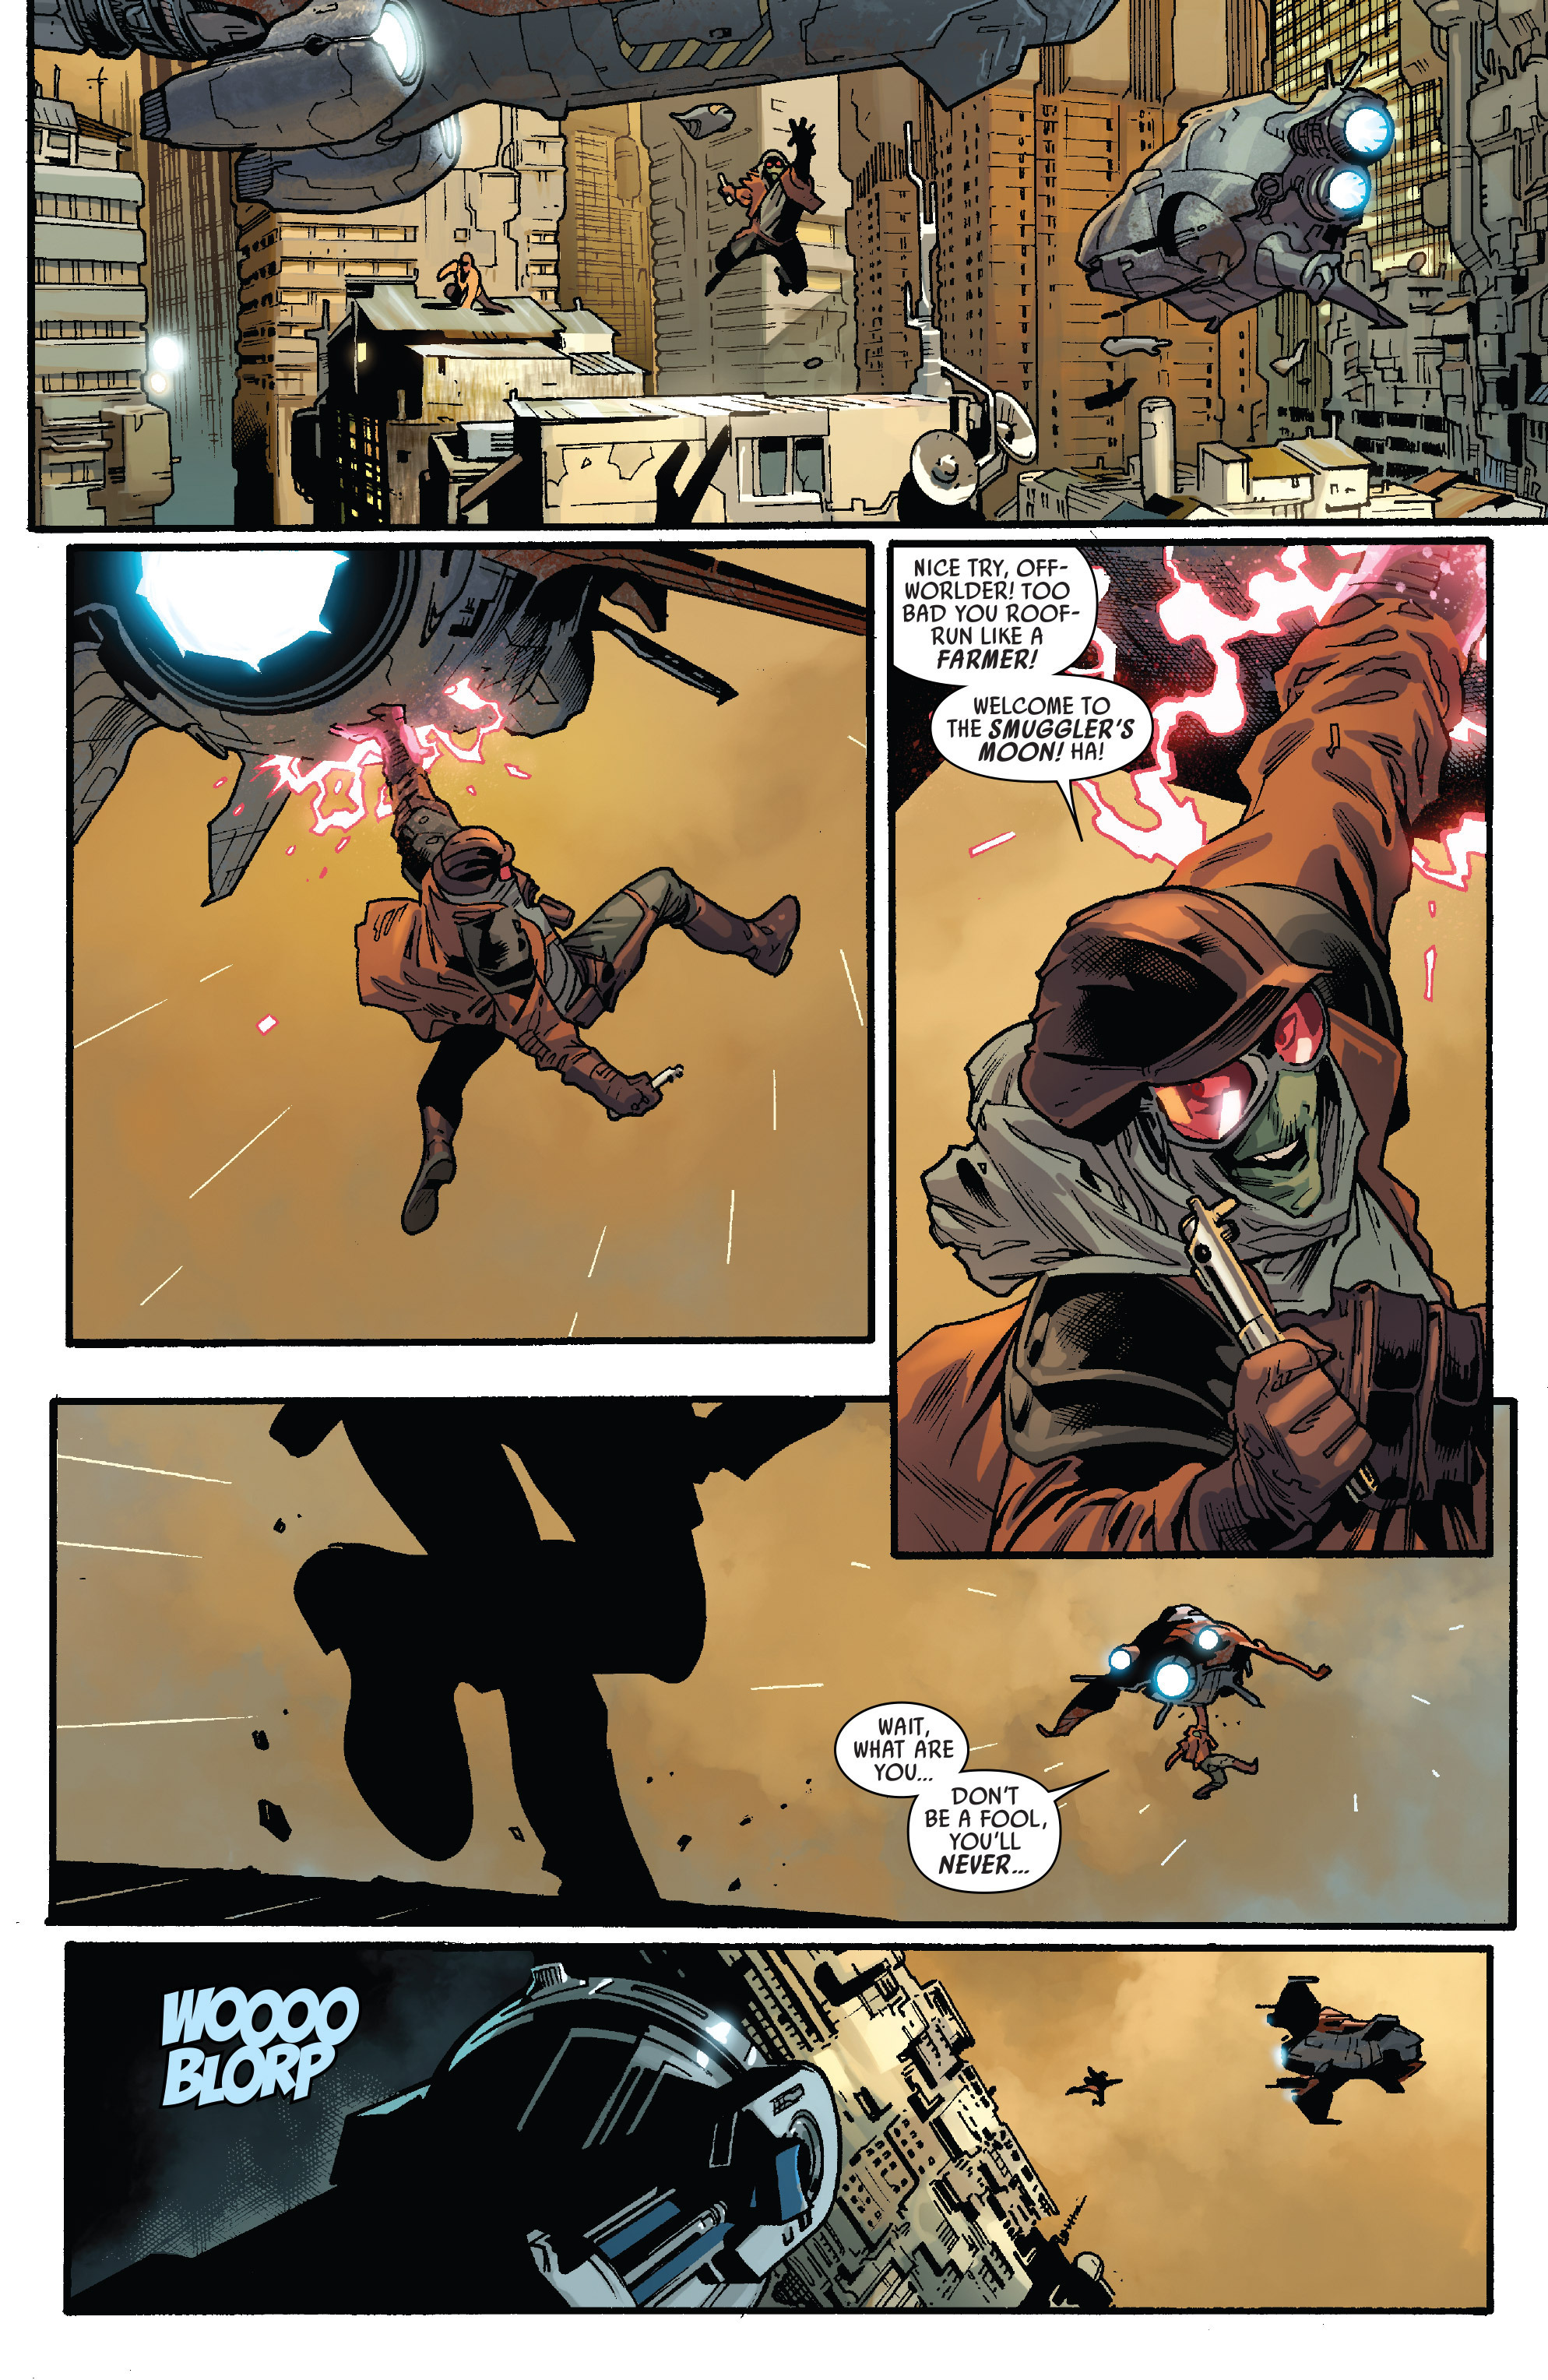 Star Wars (2015-): Chapter 9 - Page 4